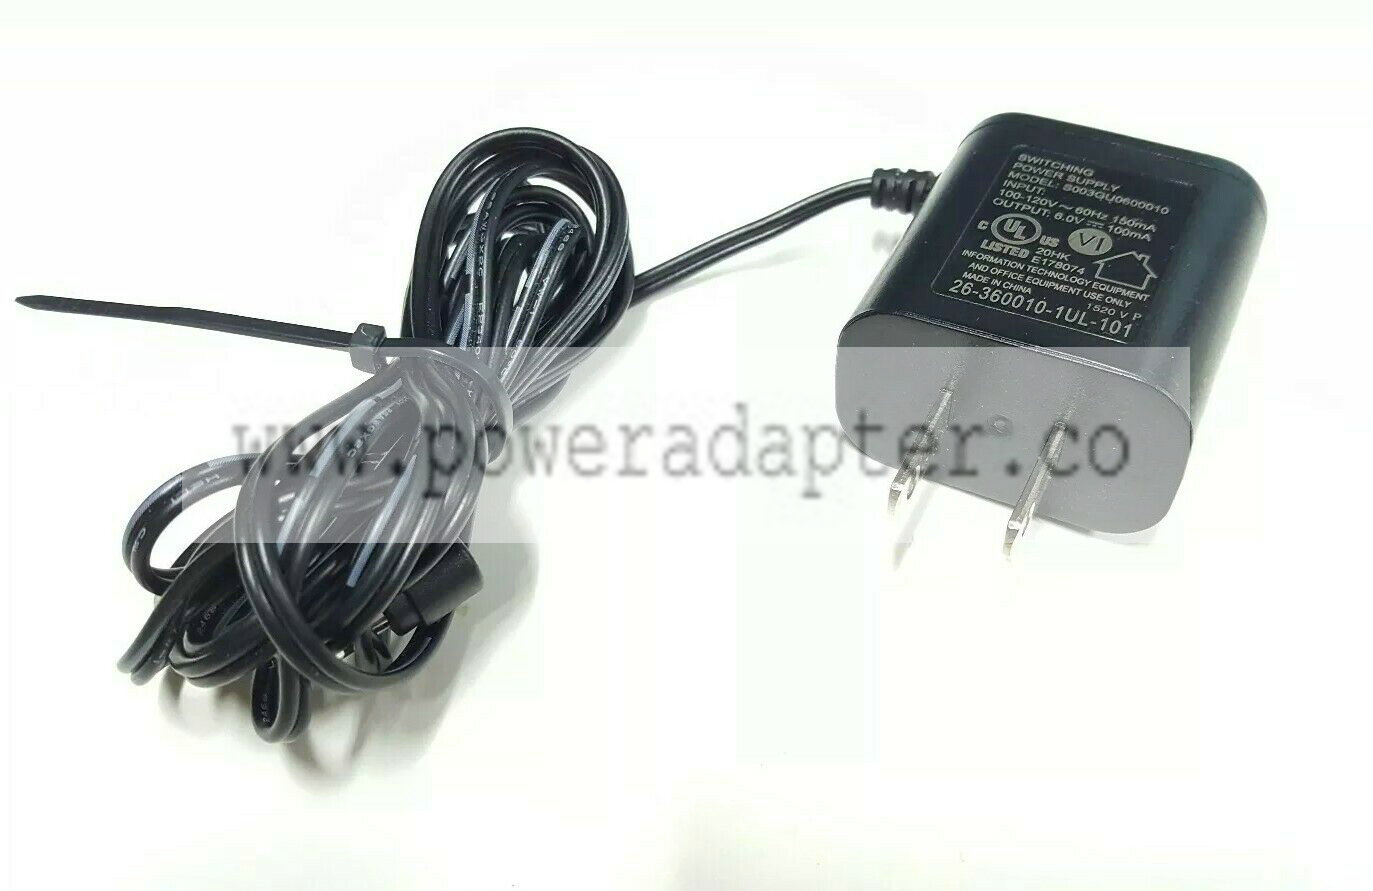 Original AT&T 4H20 Single Dock AC Adapter Brand: AT&T Type: Single Phone Charge Dock Model: 4H20 Number of Handsets